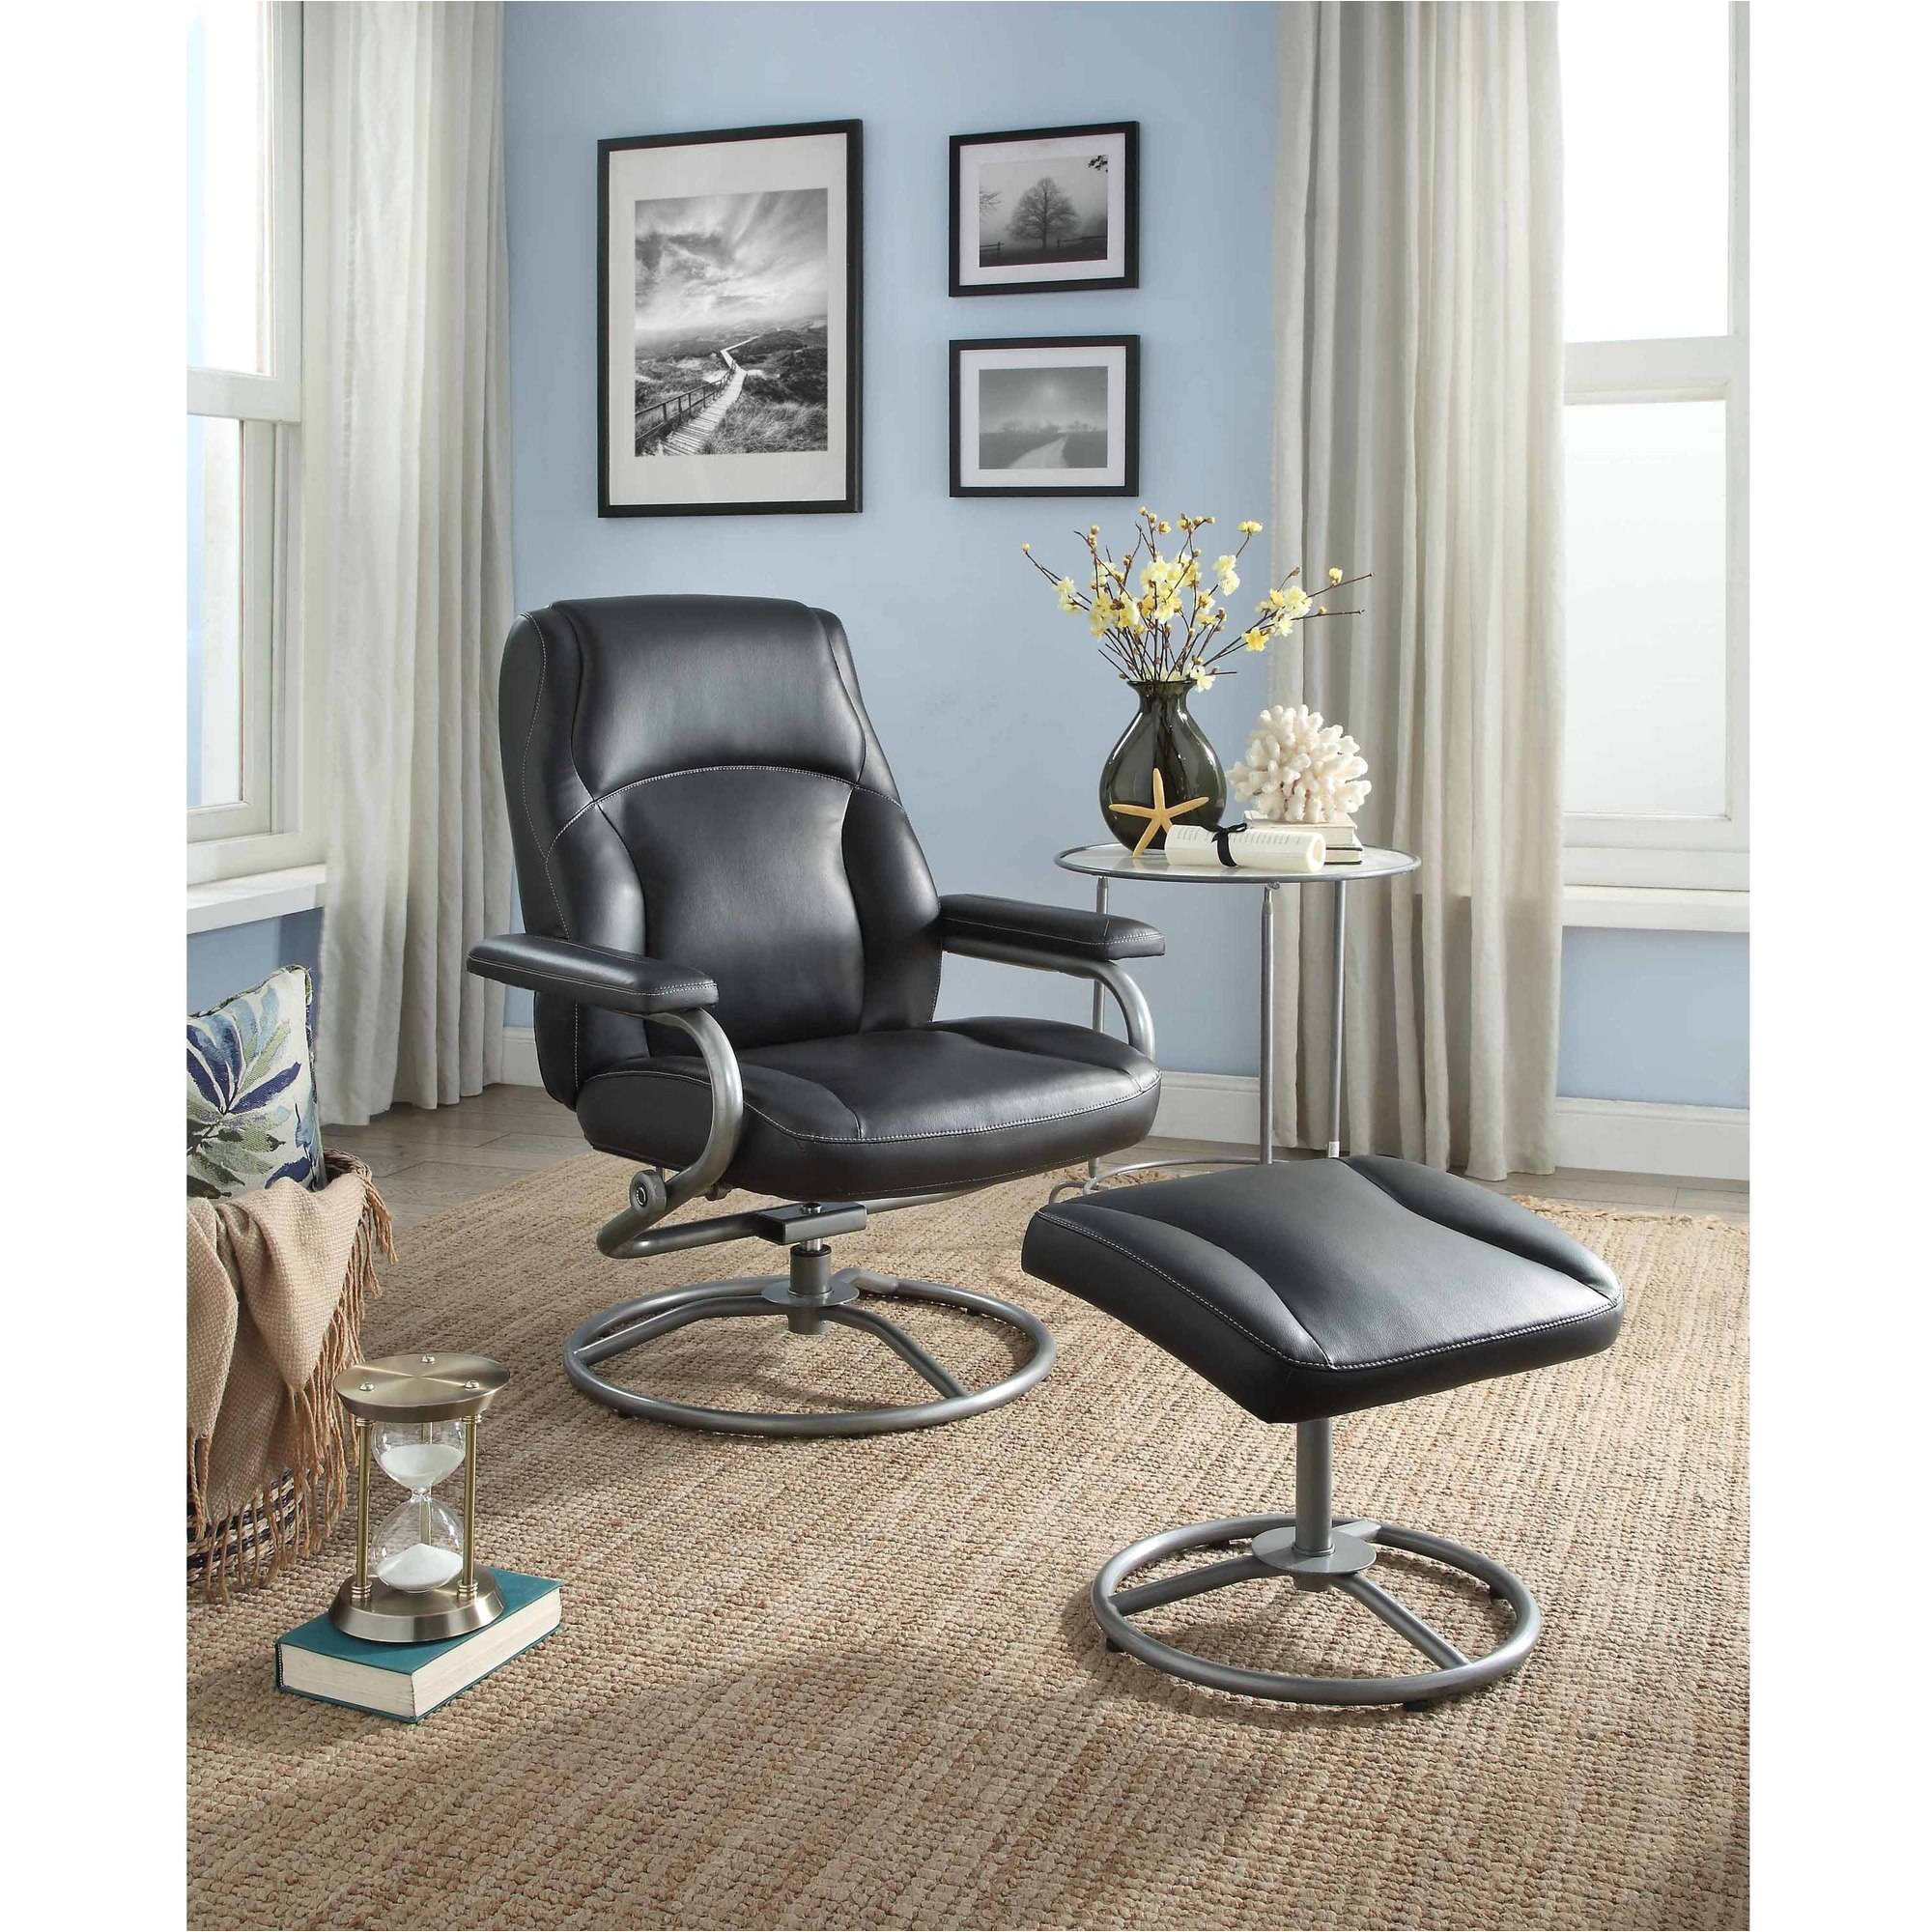 mainstays plush pillowed recliner swivel chair and ottoman set multiple available colors walmart com